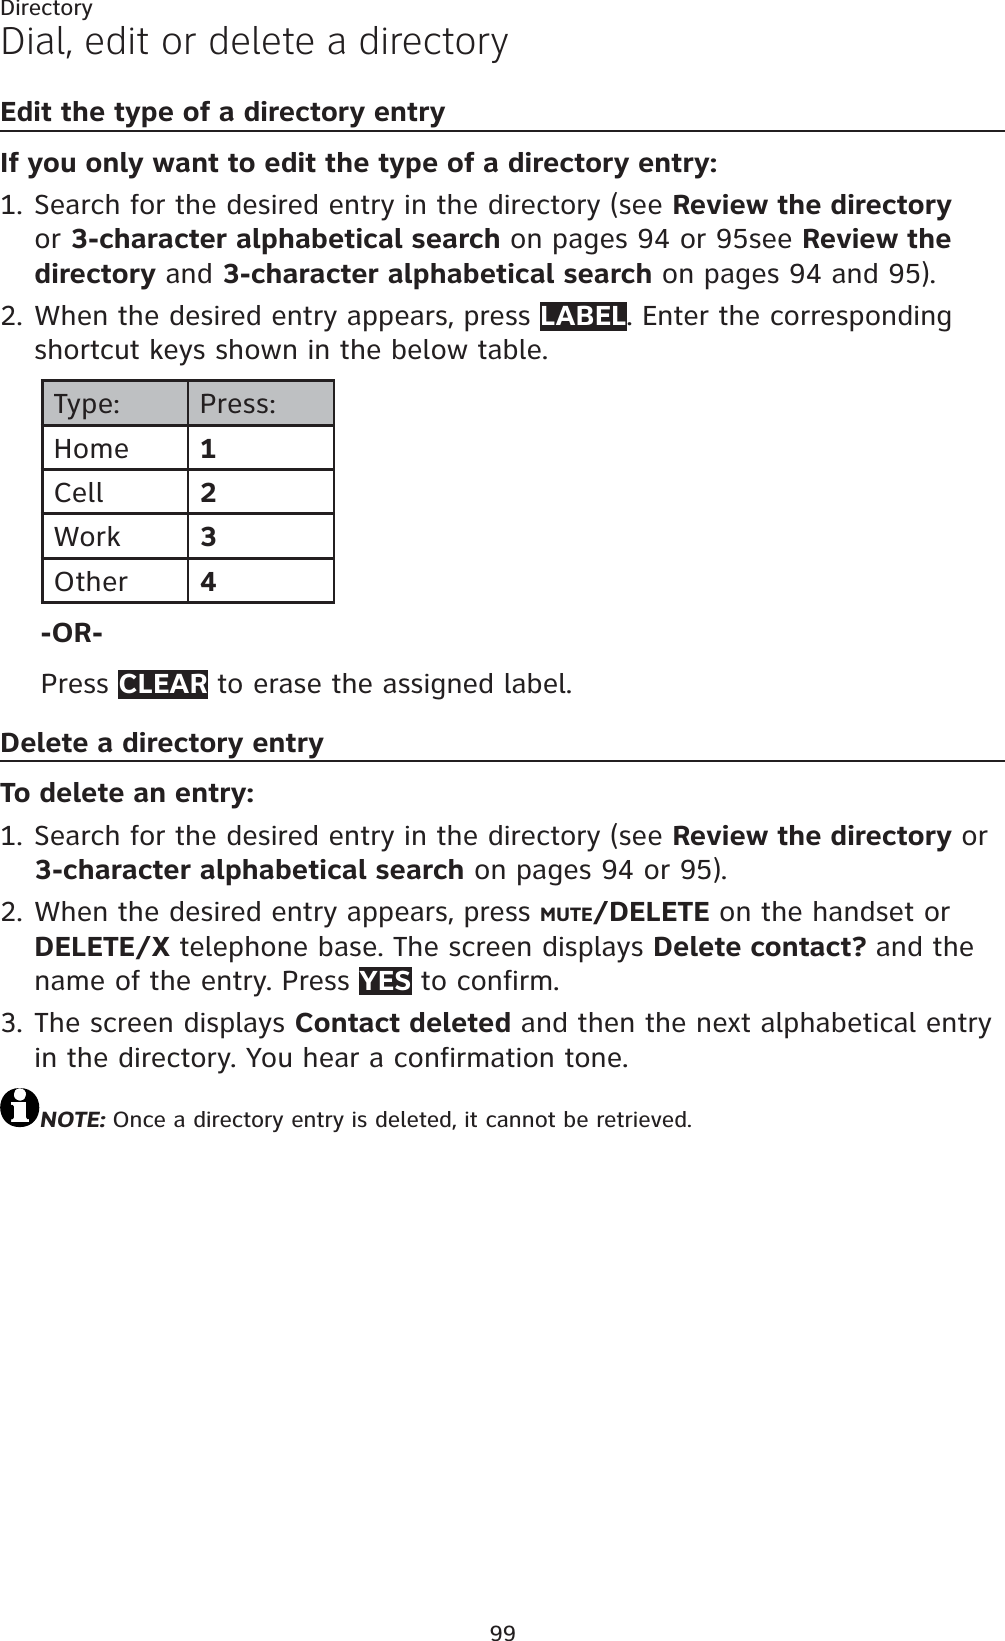 99DirectoryDial, edit or delete a directoryEdit the type of a directory entryIf you only want to edit the type of a directory entry:Search for the desired entry in the directory (see Review the directoryor 3-character alphabetical search on pages 94 or 95see Review the directory and 3-character alphabetical search on pages 94 and 95).When the desired entry appears, press LABEL. Enter the corresponding shortcut keys shown in the below table.Type: Press:Home 1Cell 2Work 3Other 4-OR-Press CLEAR to erase the assigned label.Delete a directory entryTo delete an entry:Search for the desired entry in the directory (see Review the directory or 3-character alphabetical search on pages 94 or 95).When the desired entry appears, press MUTE/DELETE on the handset or DELETE/X telephone base. The screen displays Delete contact? and the name of the entry. Press YES to confirm.The screen displays Contact deleted and then the next alphabetical entry in the directory. You hear a confirmation tone.NOTE: Once a directory entry is deleted, it cannot be retrieved.1.2.1.2.3.